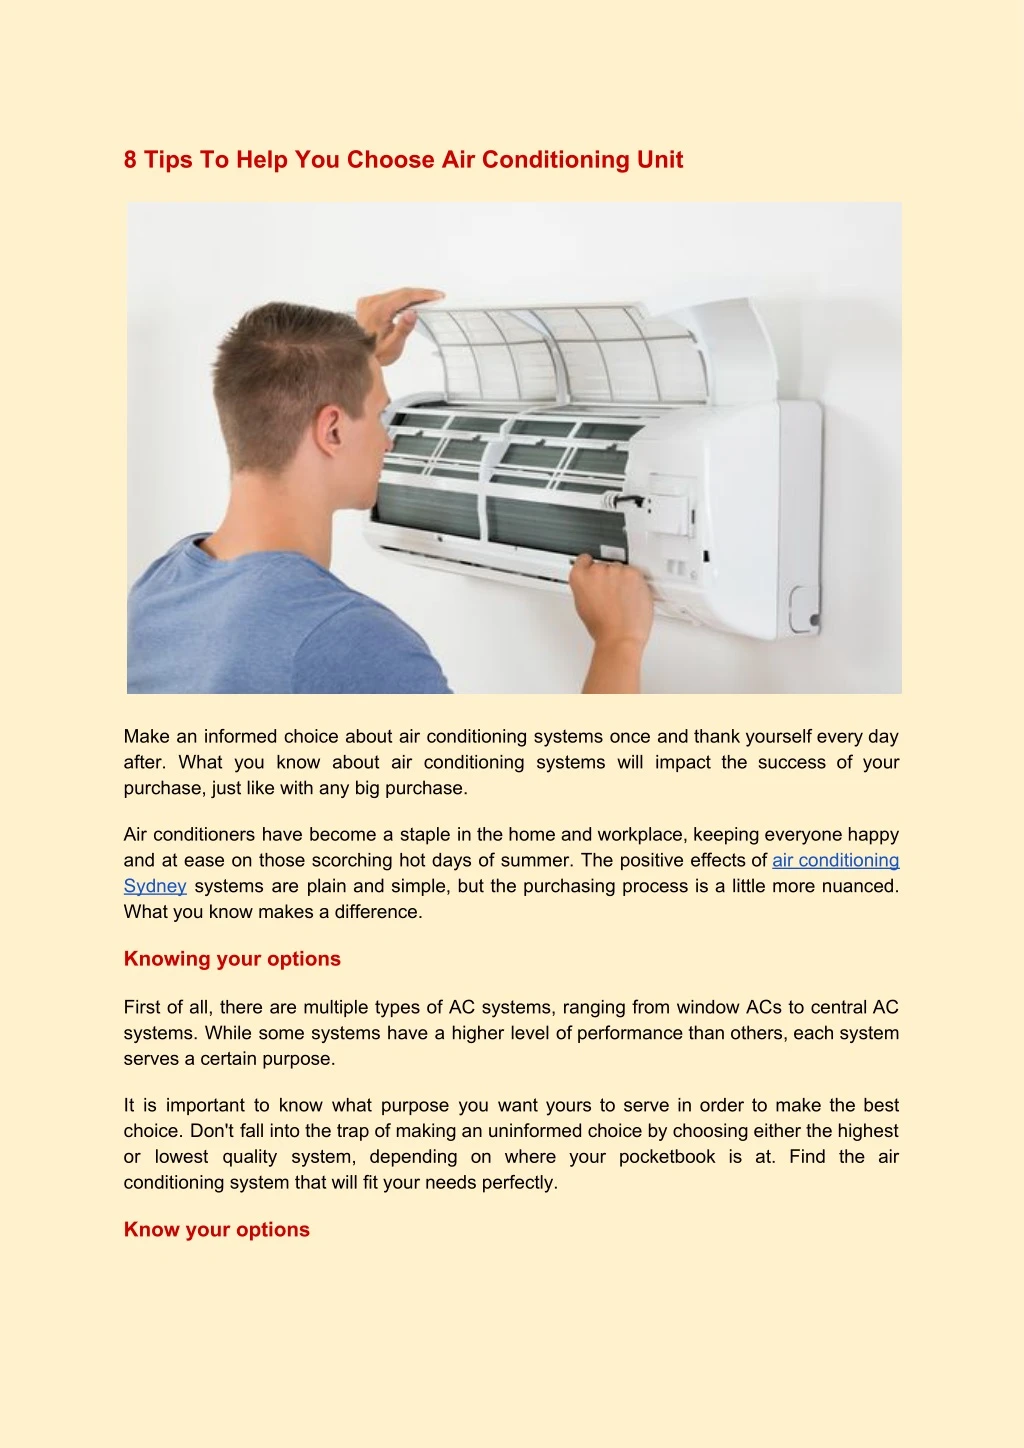 8 tips to help you choose air conditioning unit